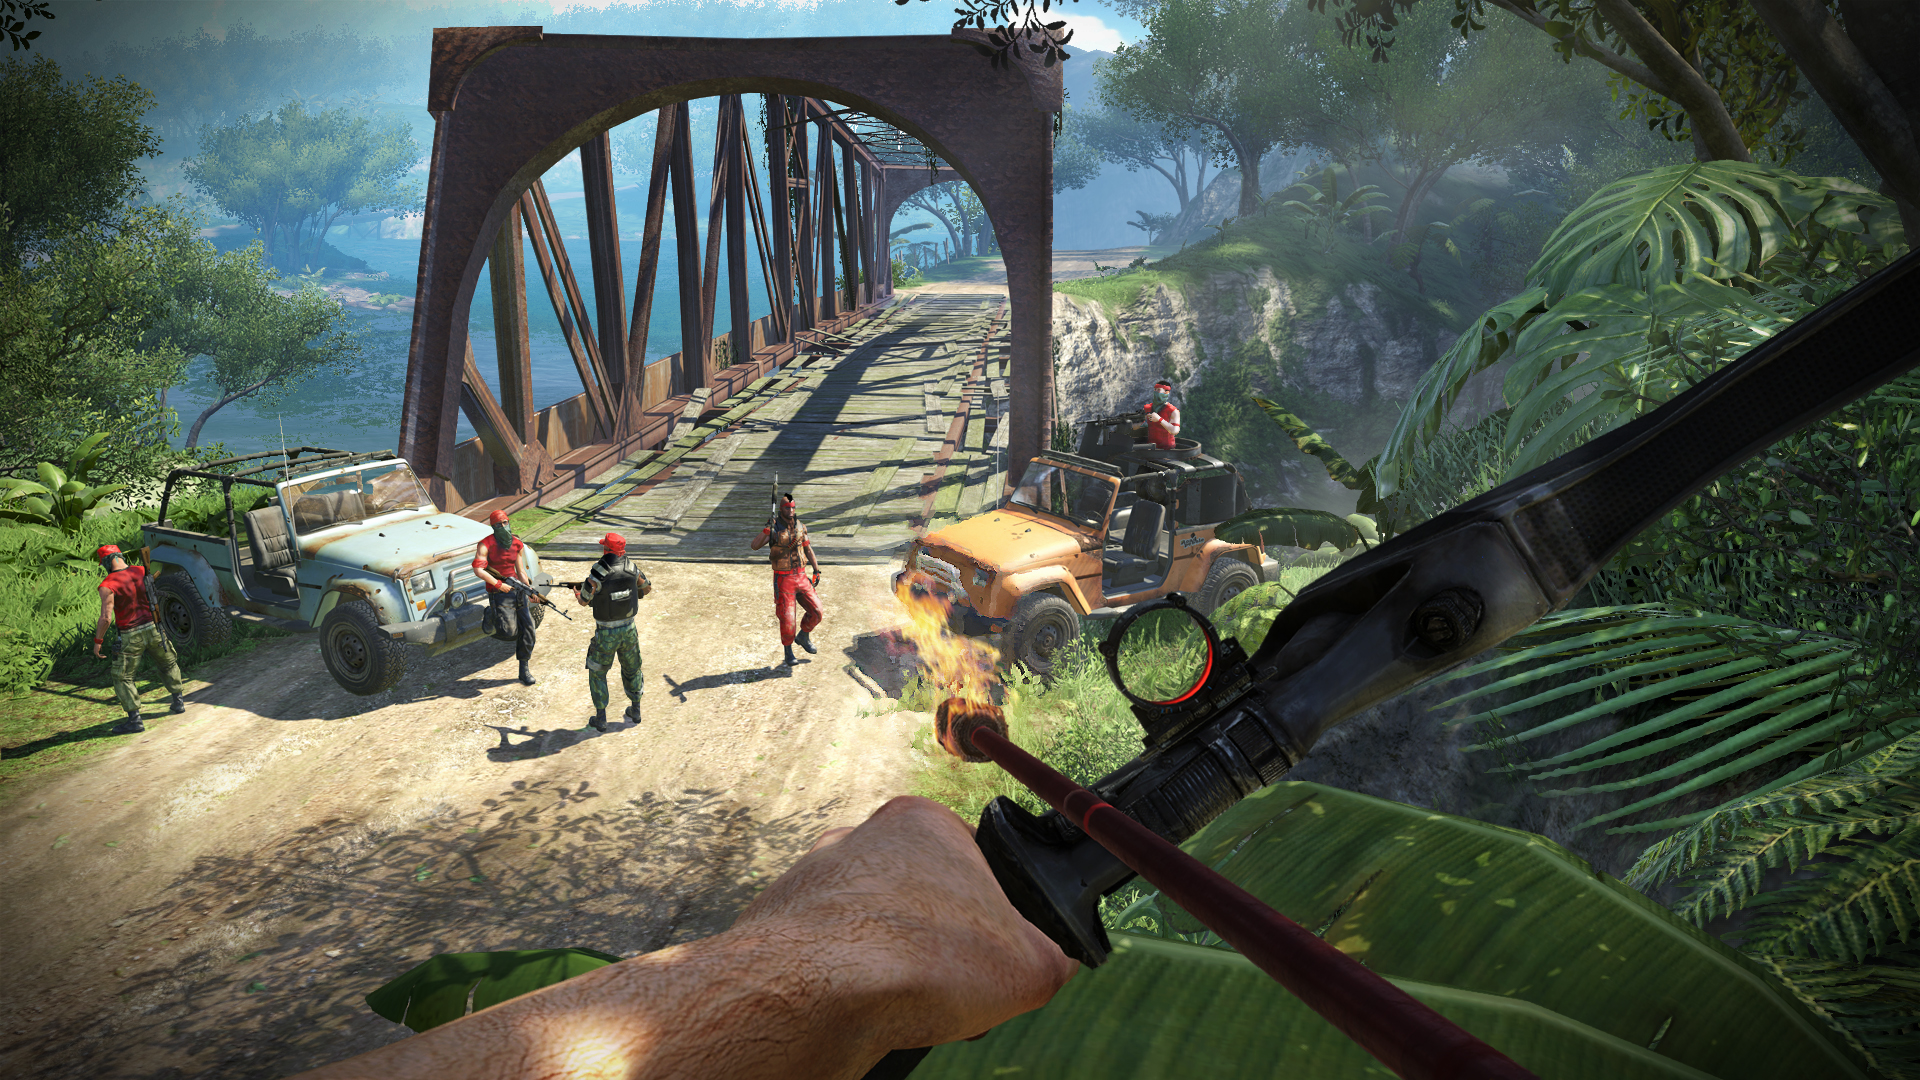 http://www.gamer.ru/system/attached_images/images/000/589/244/original/farcry3reviewscreenshot2.jpg